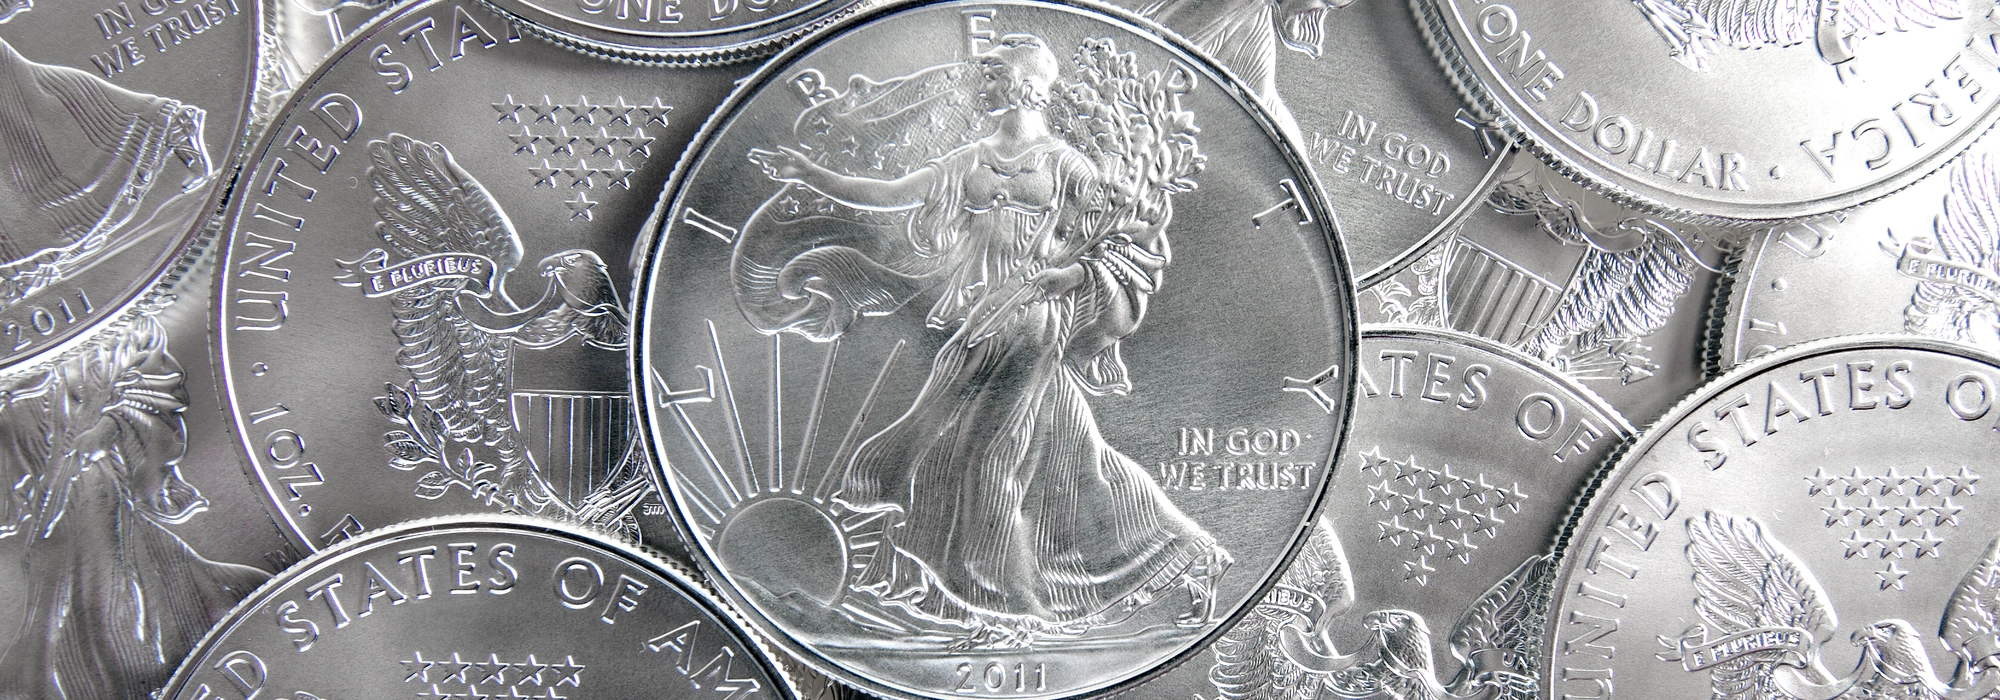 Silver Bars vs Coins: Which Should You Buy?